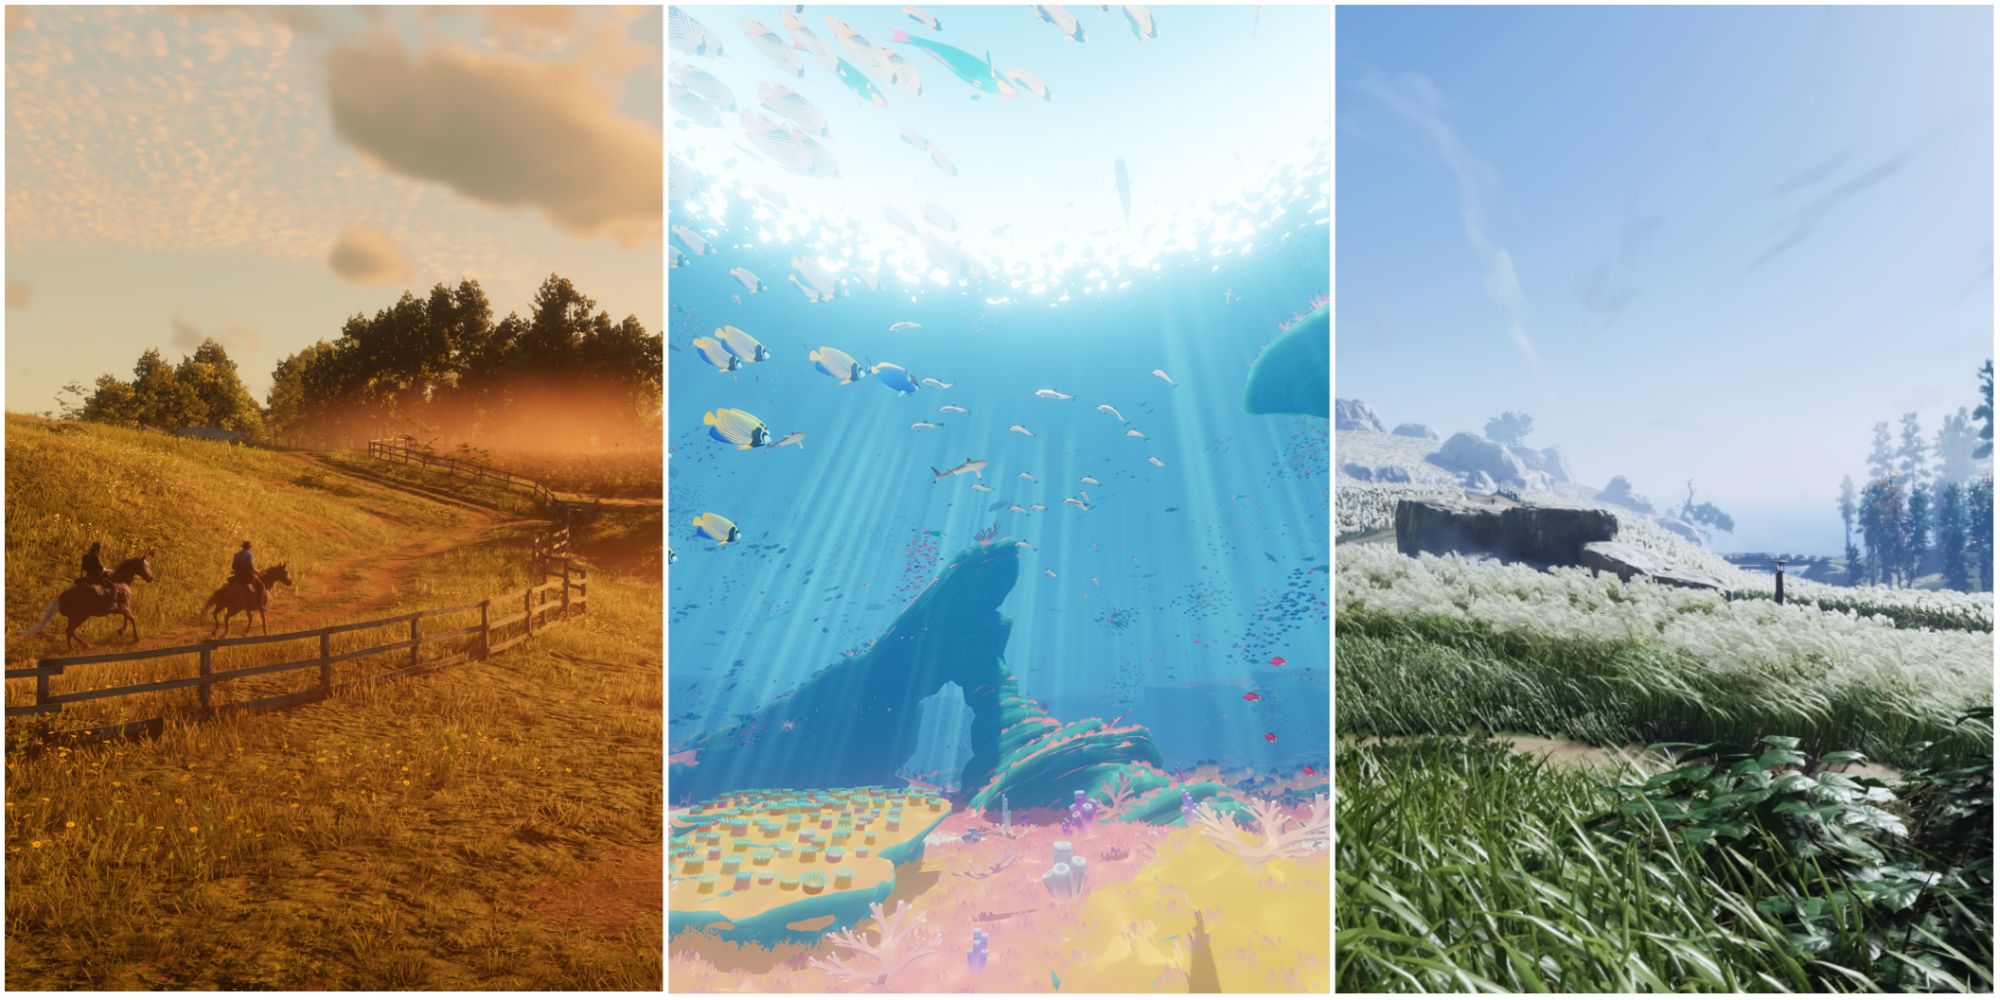 Split image showing various vistas in Red Dead Redemption 2, Abzu, and Ghost of Tsushima